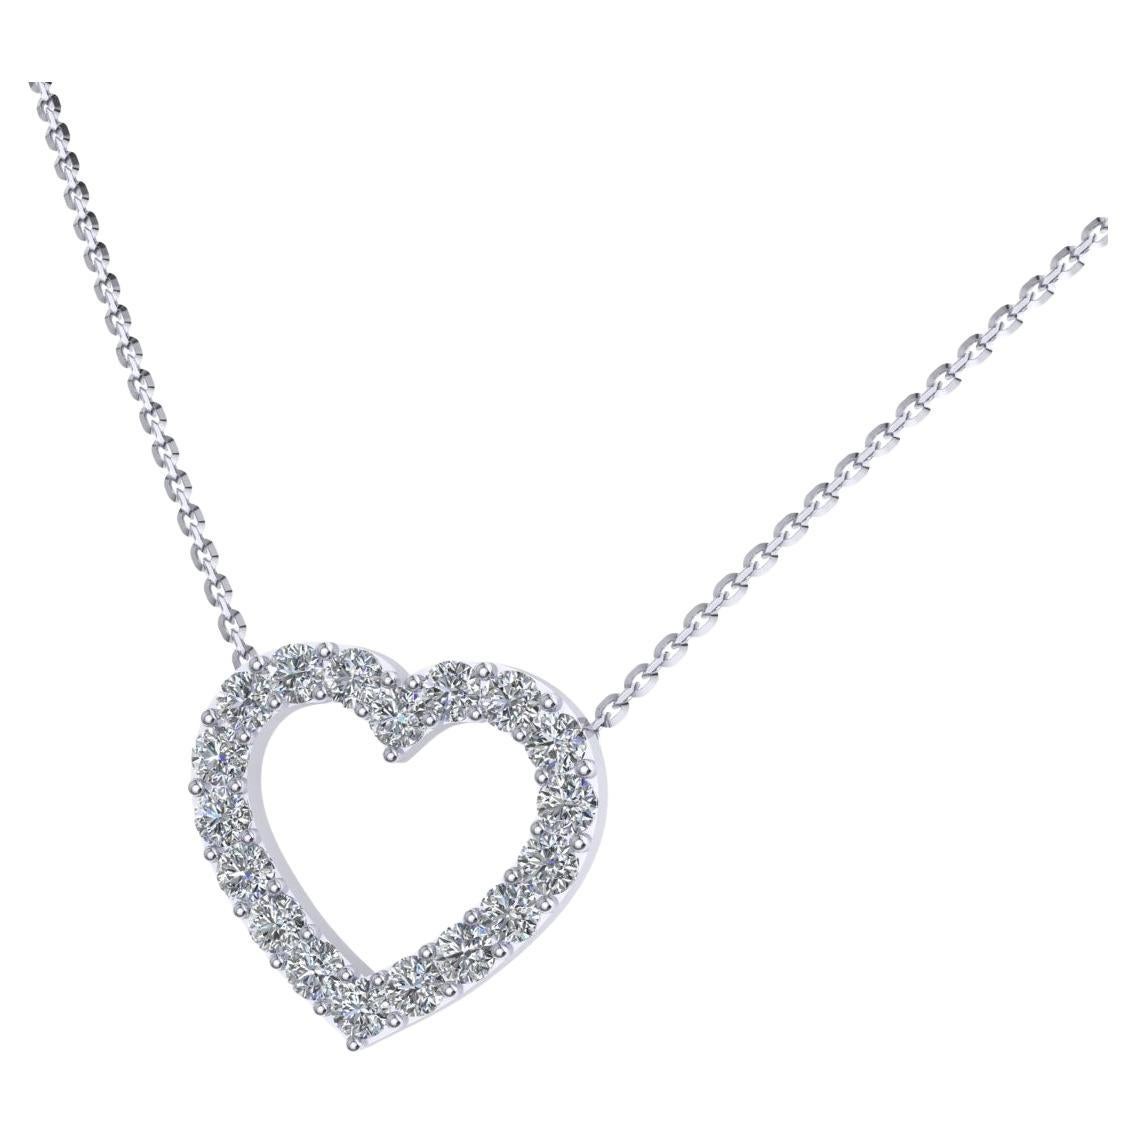 Heart Pendant with Natural Diamonds, 18kt Gold, Made in Italy